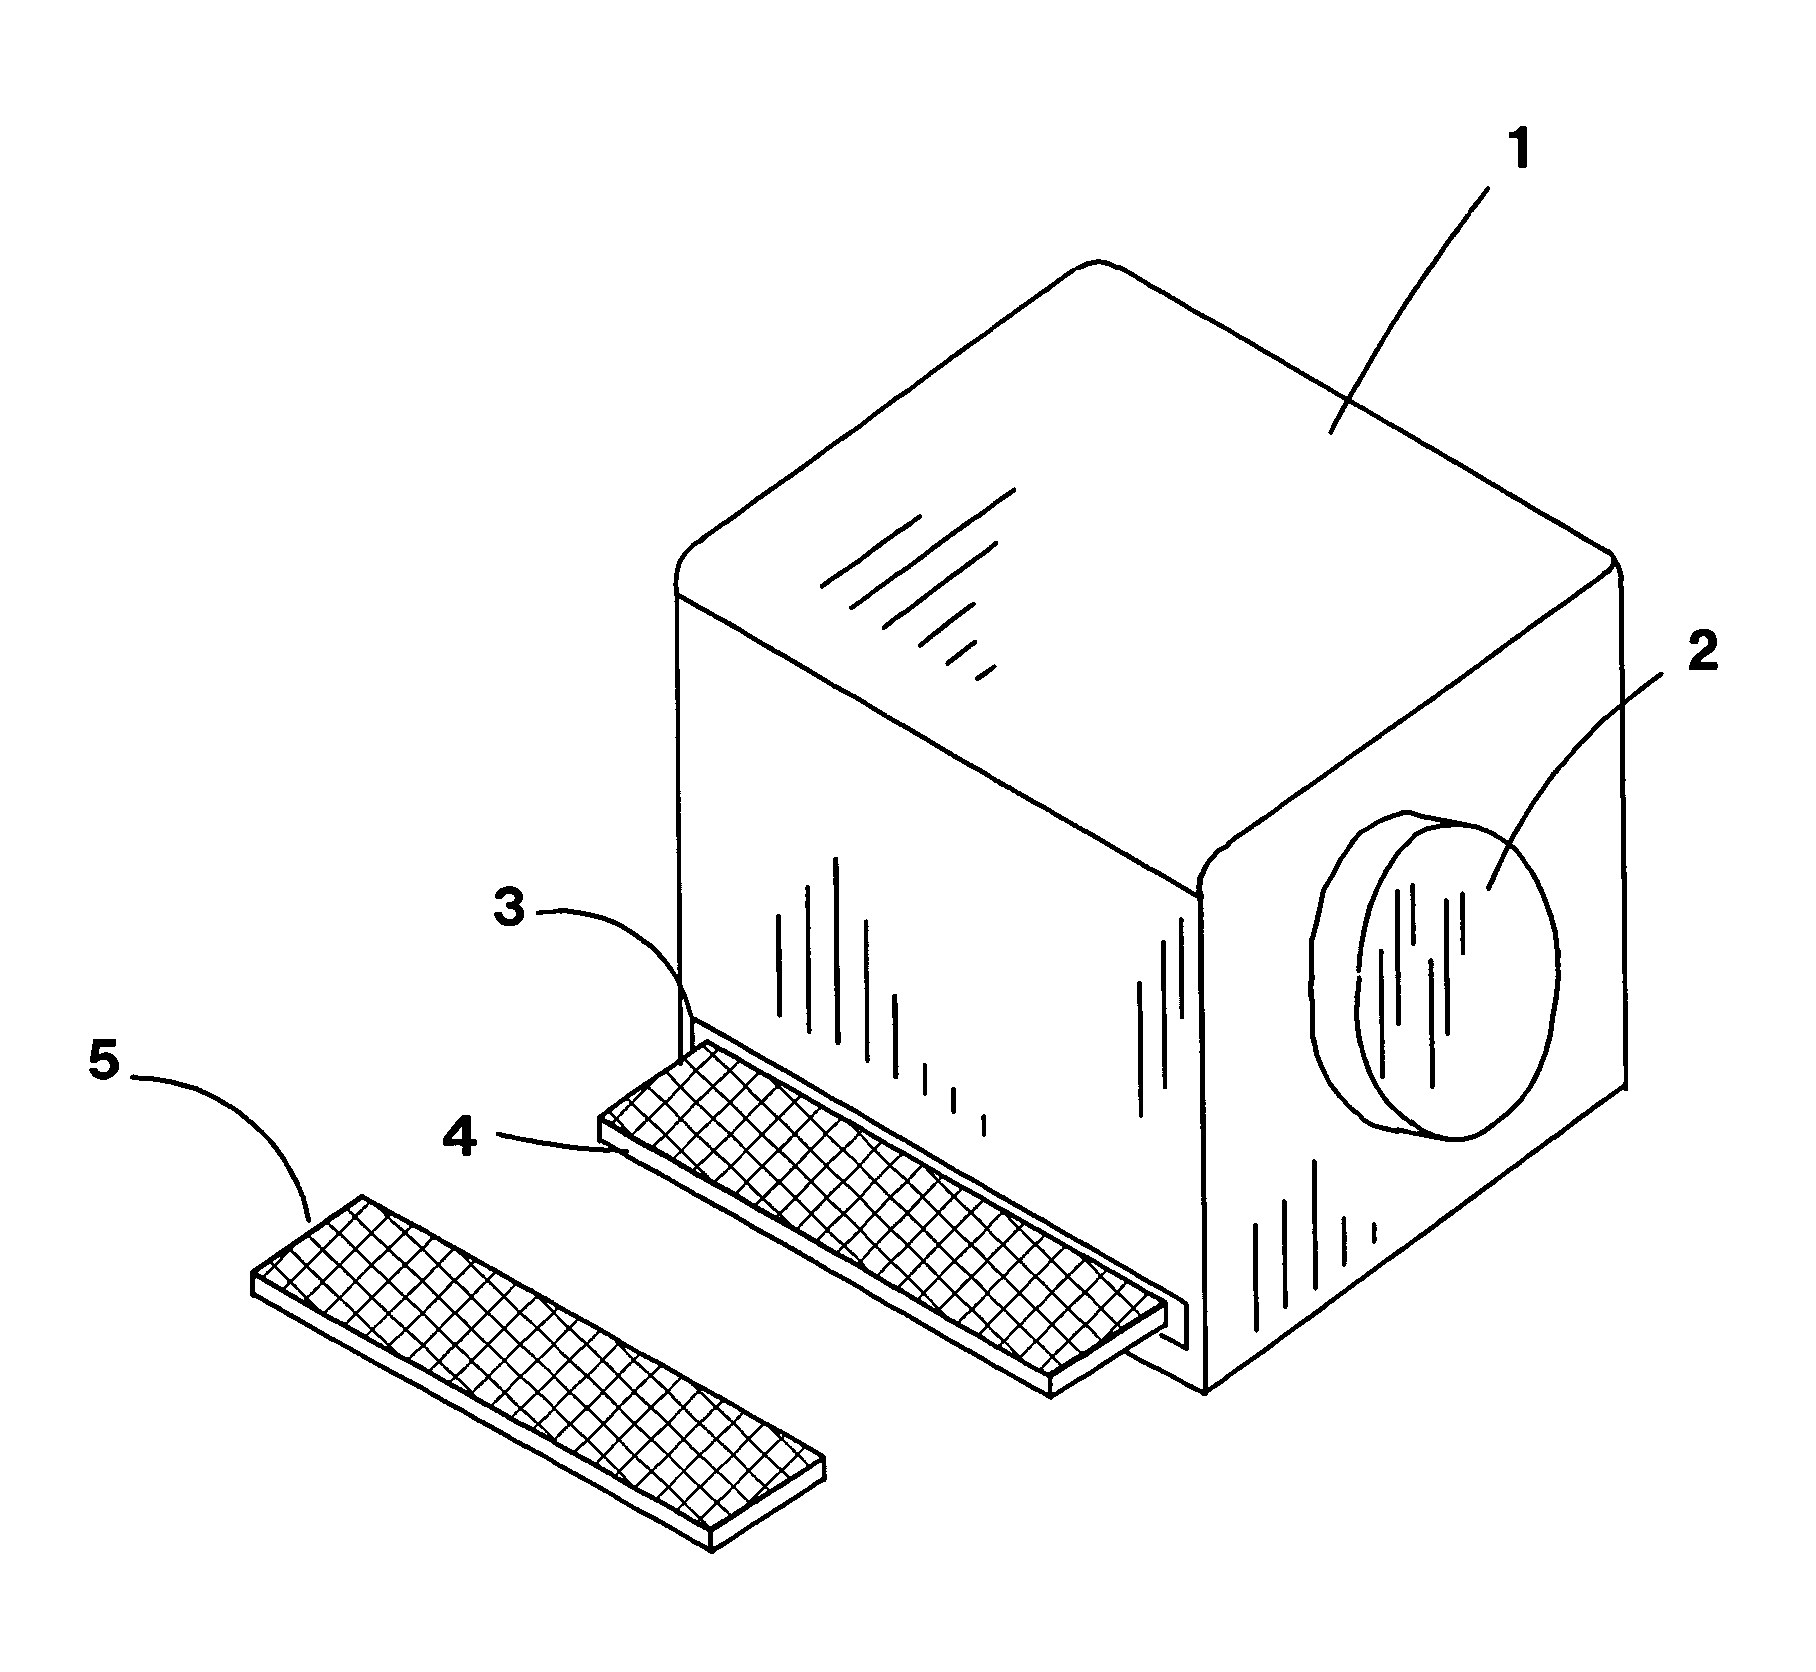 Flexible file and file dispenser system